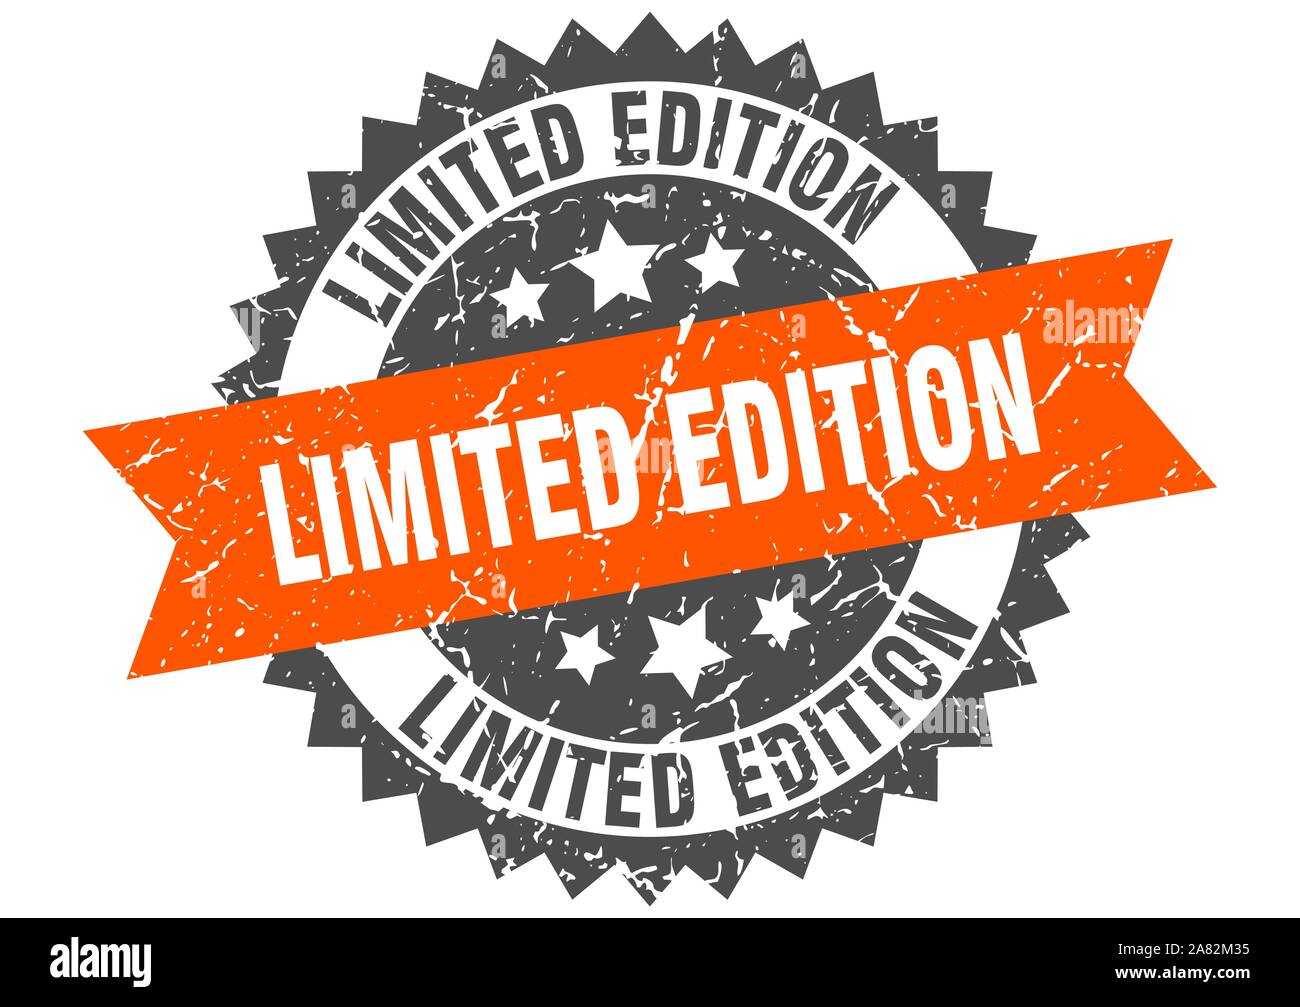 limited edition grunge stamp with orange band. limited edition Stock Vector